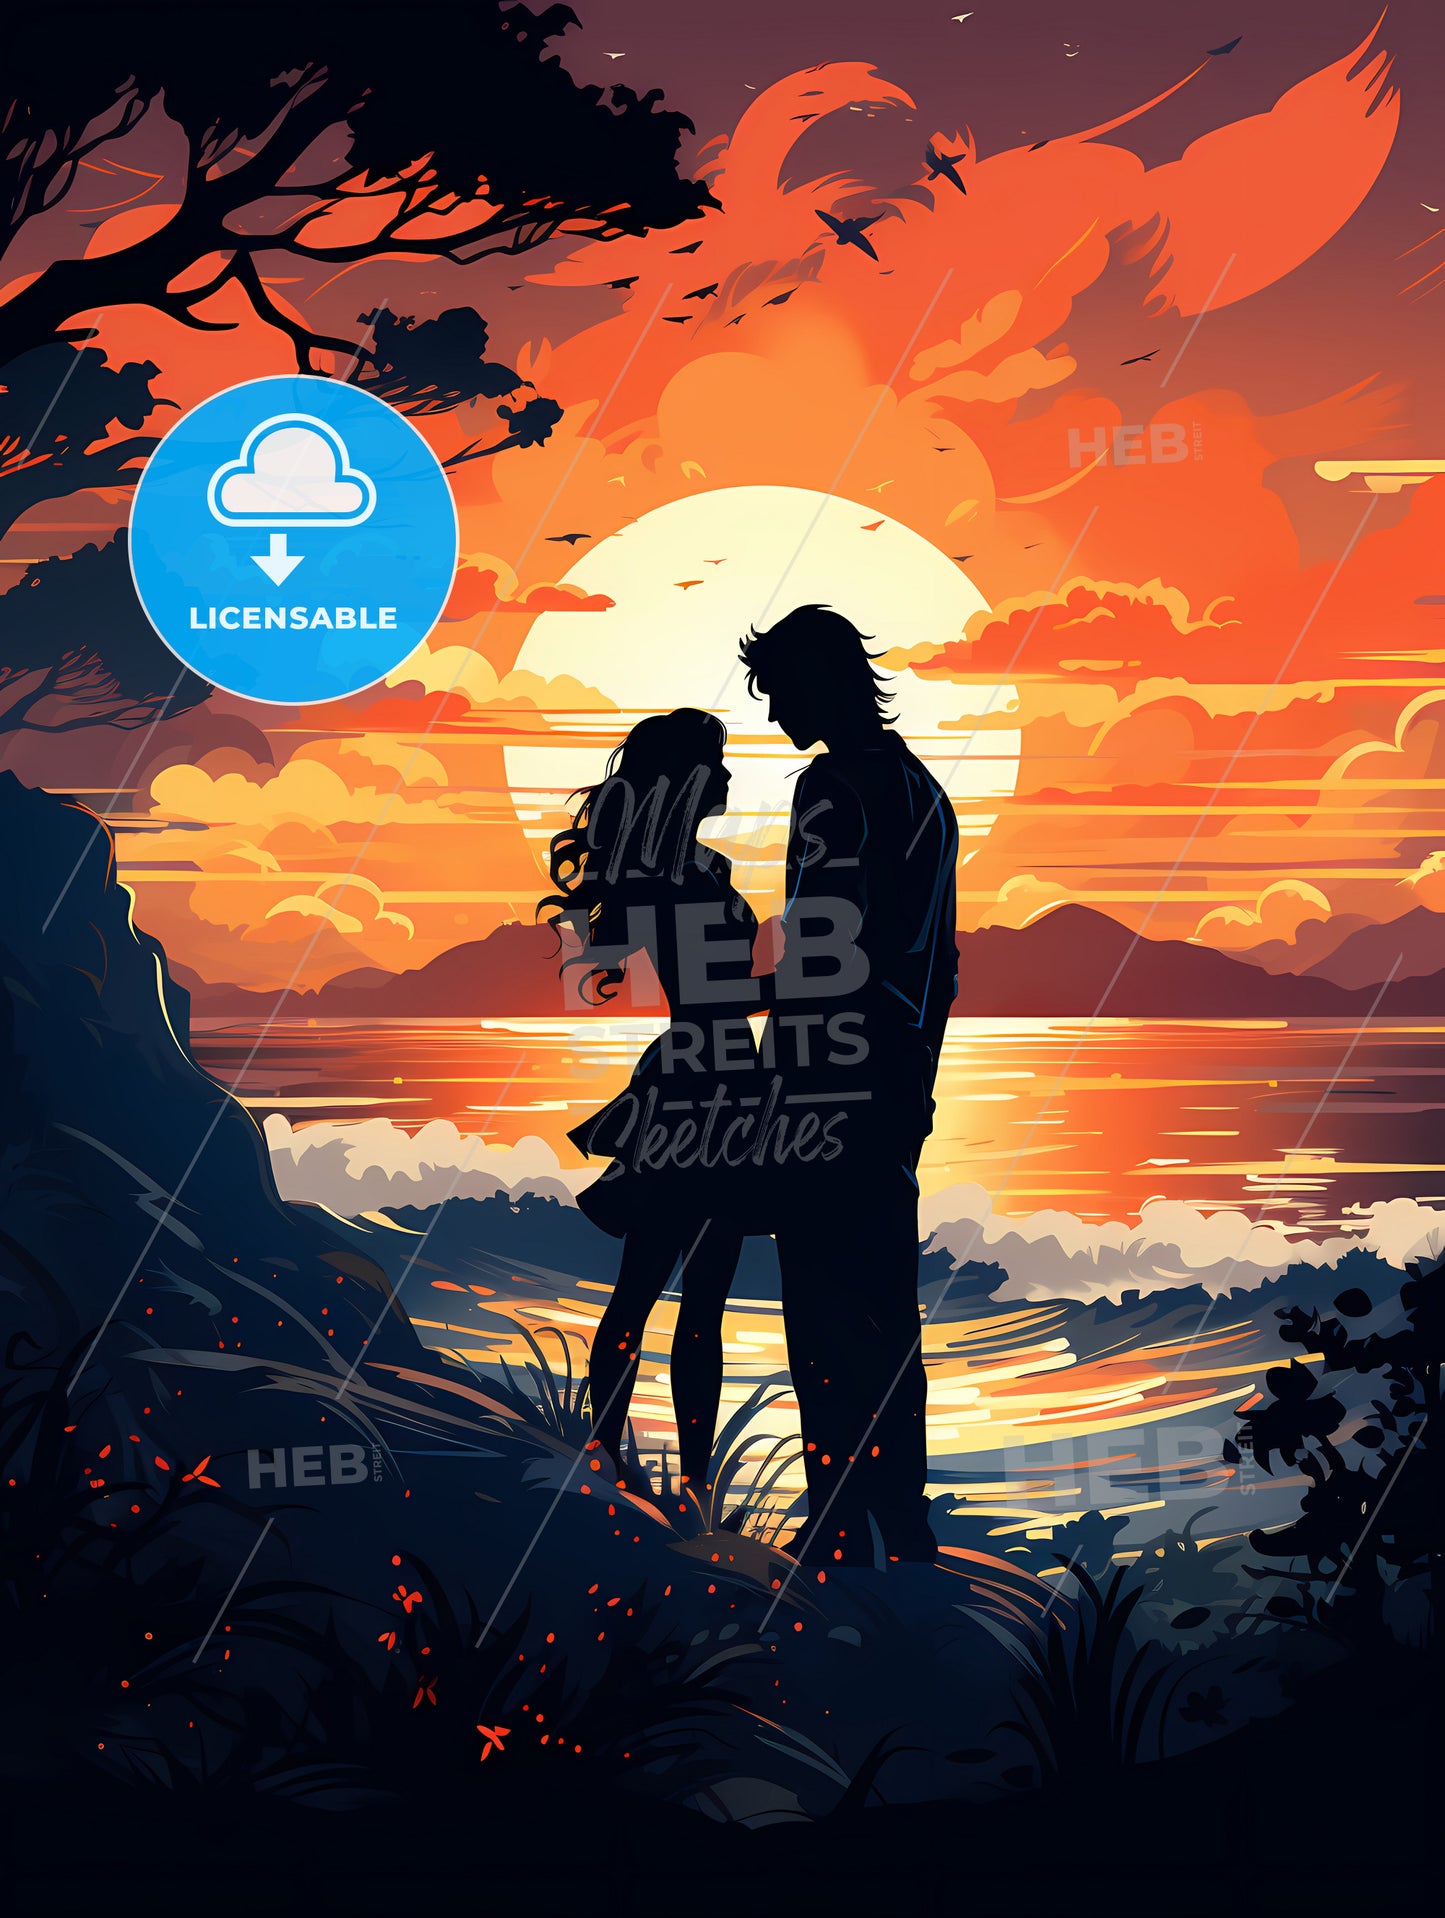 More Than Friends - A Man And Woman Standing On A Hill With A Sunset Behind Them